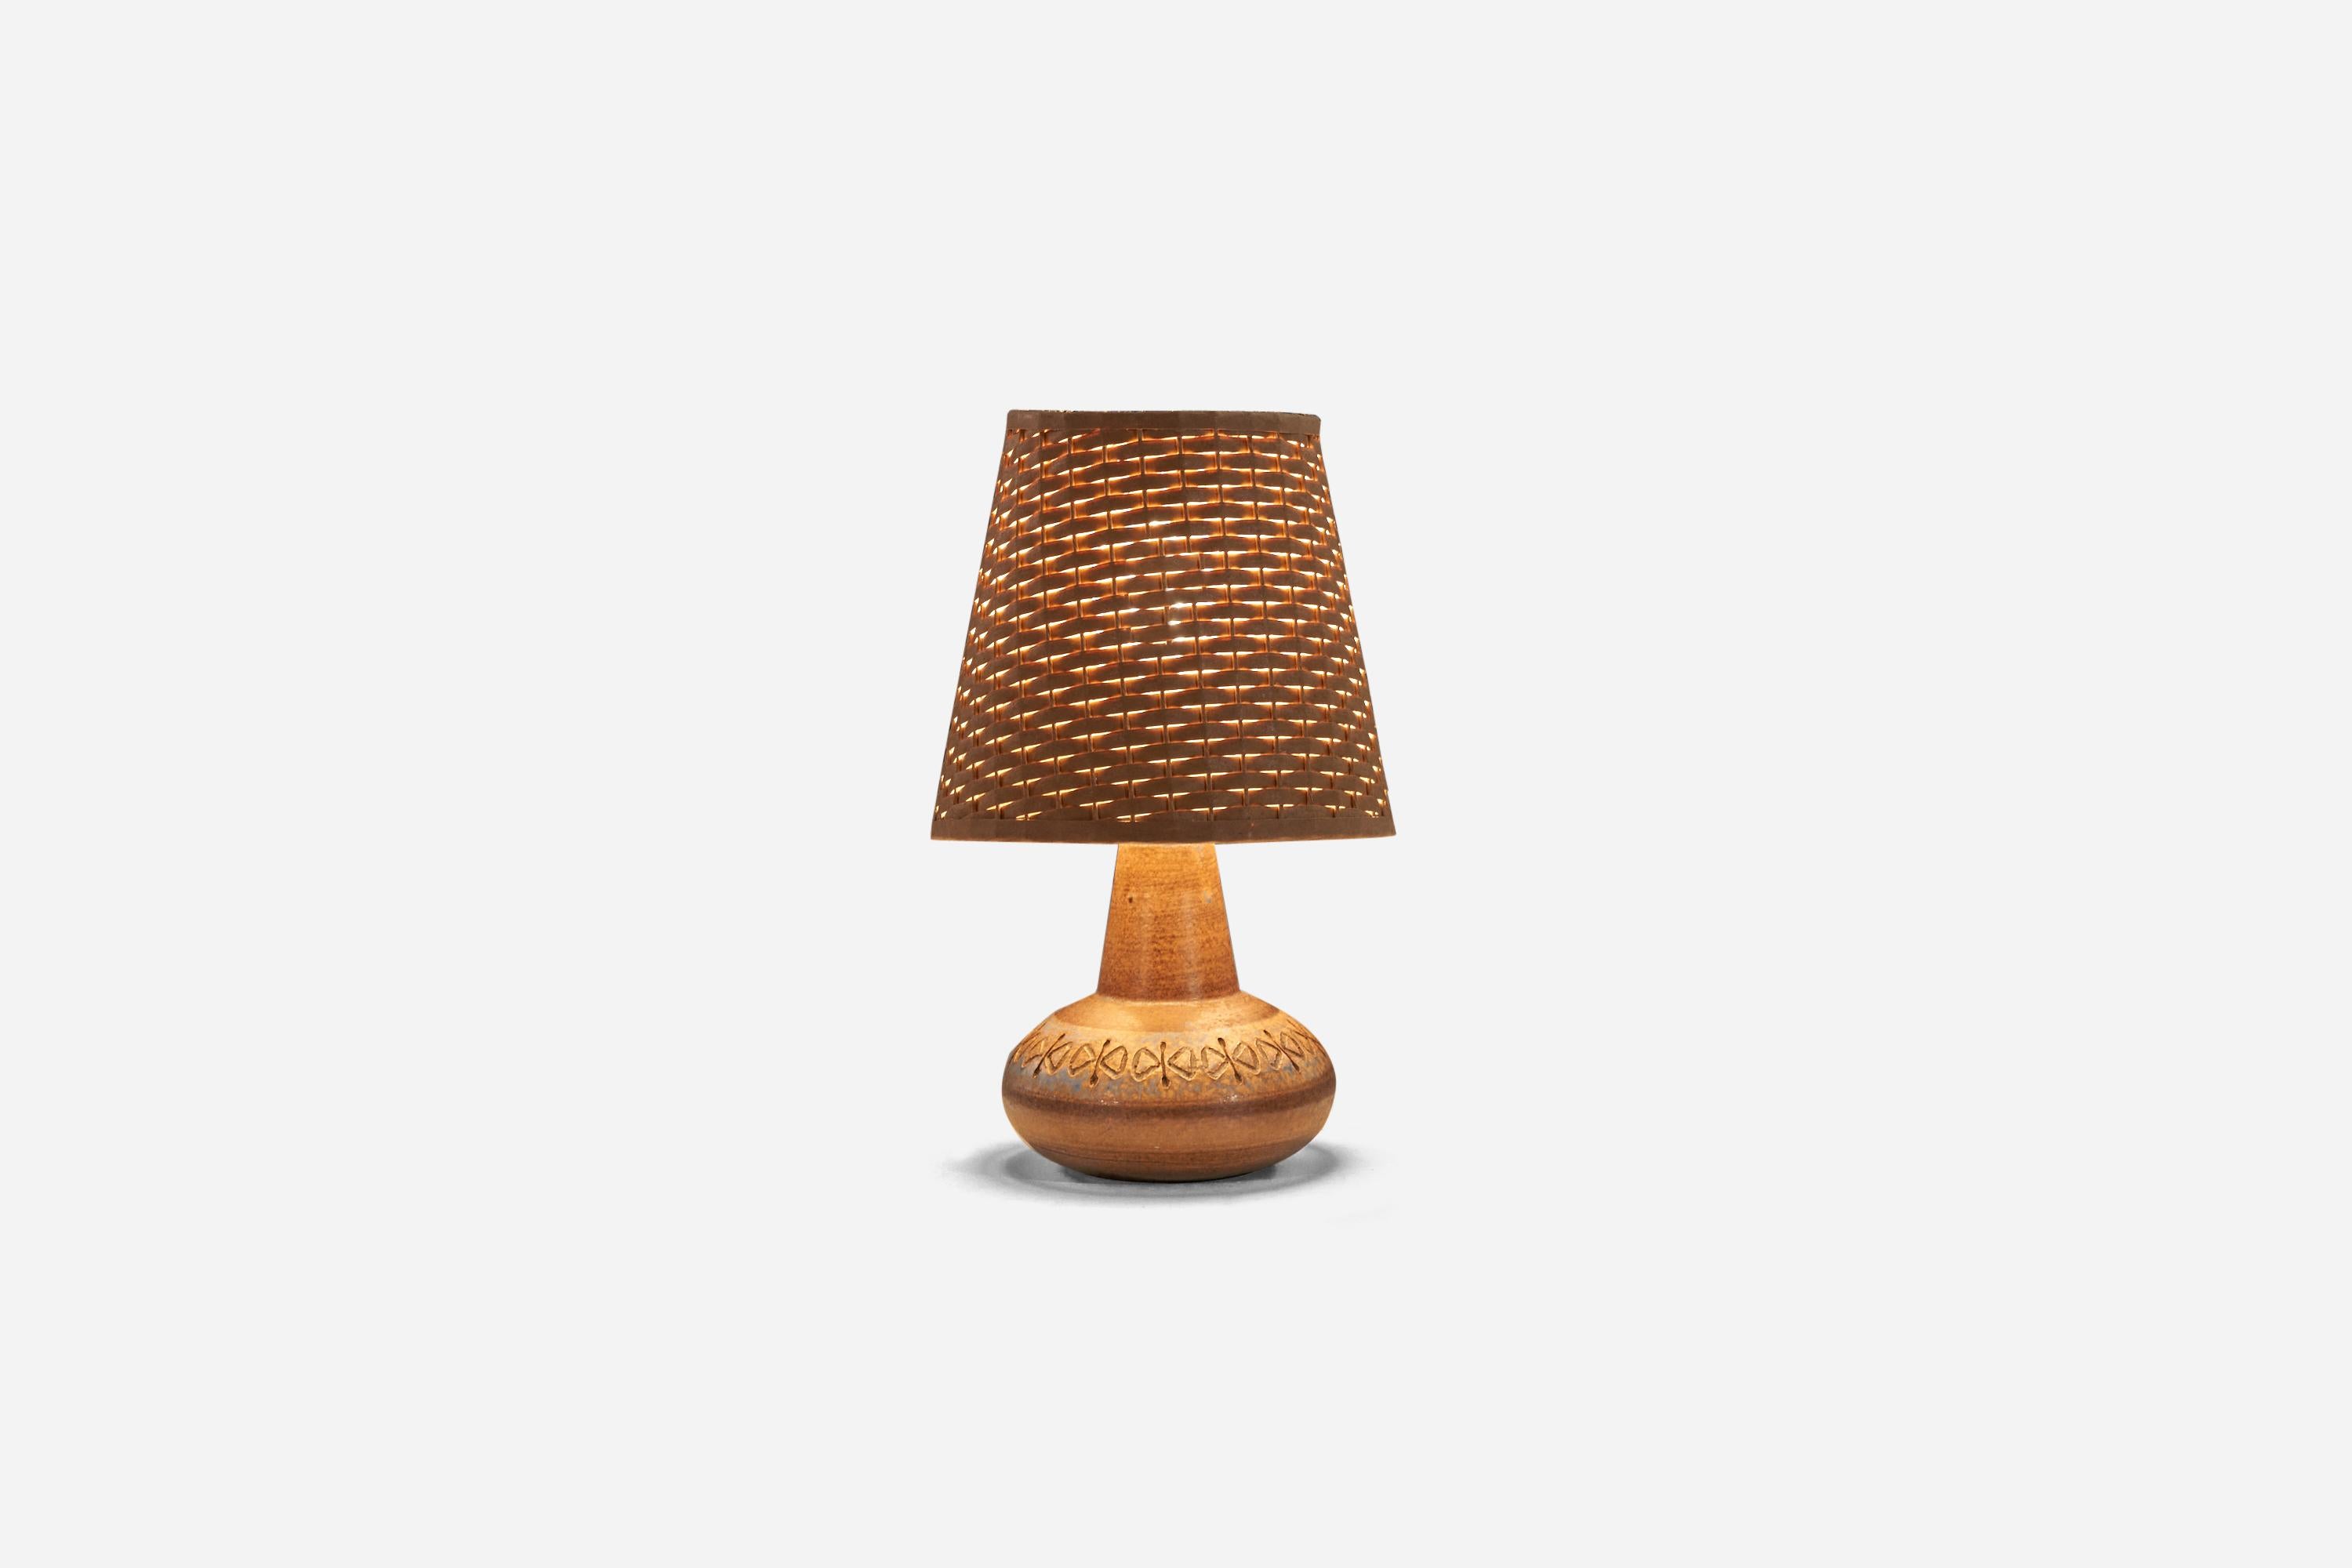 Swedish Ulla Winbladh, Brown Table Lamp, Glazed Incised Stoneware, Sweden, 1950s For Sale